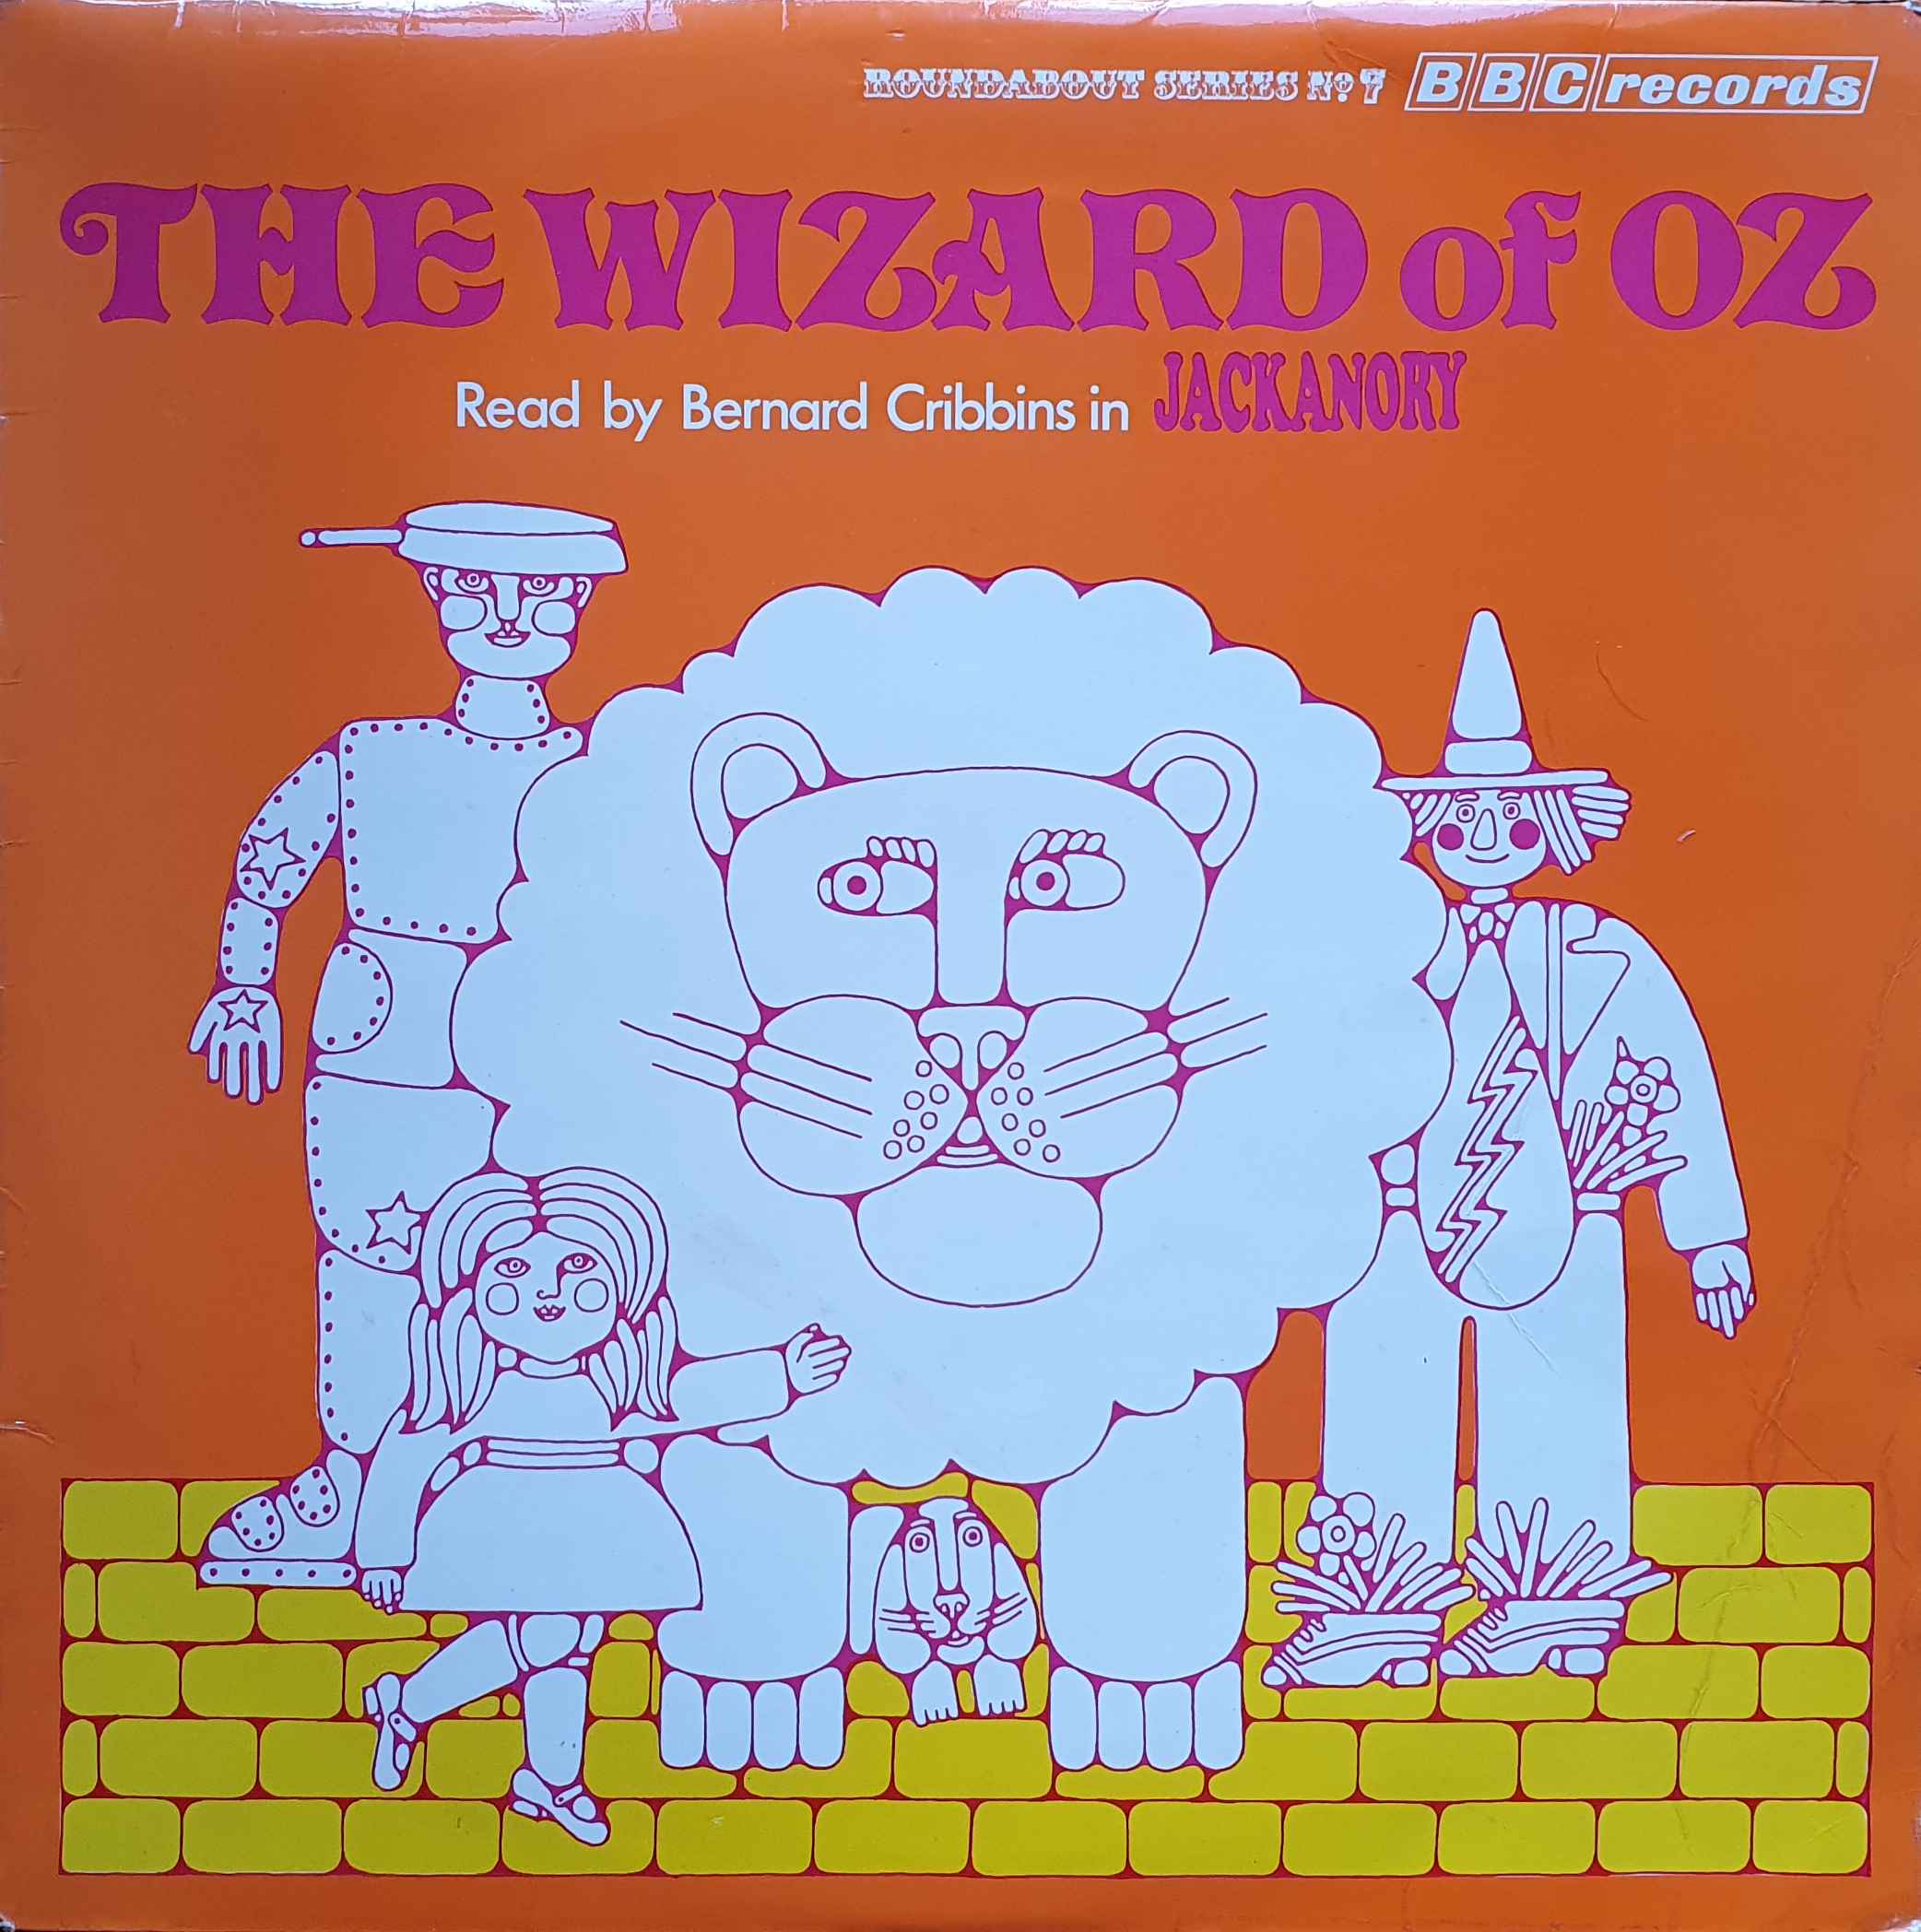 Picture of RBT 7 Wizard of oz by artist Bernard Cribbins from the BBC albums - Records and Tapes library